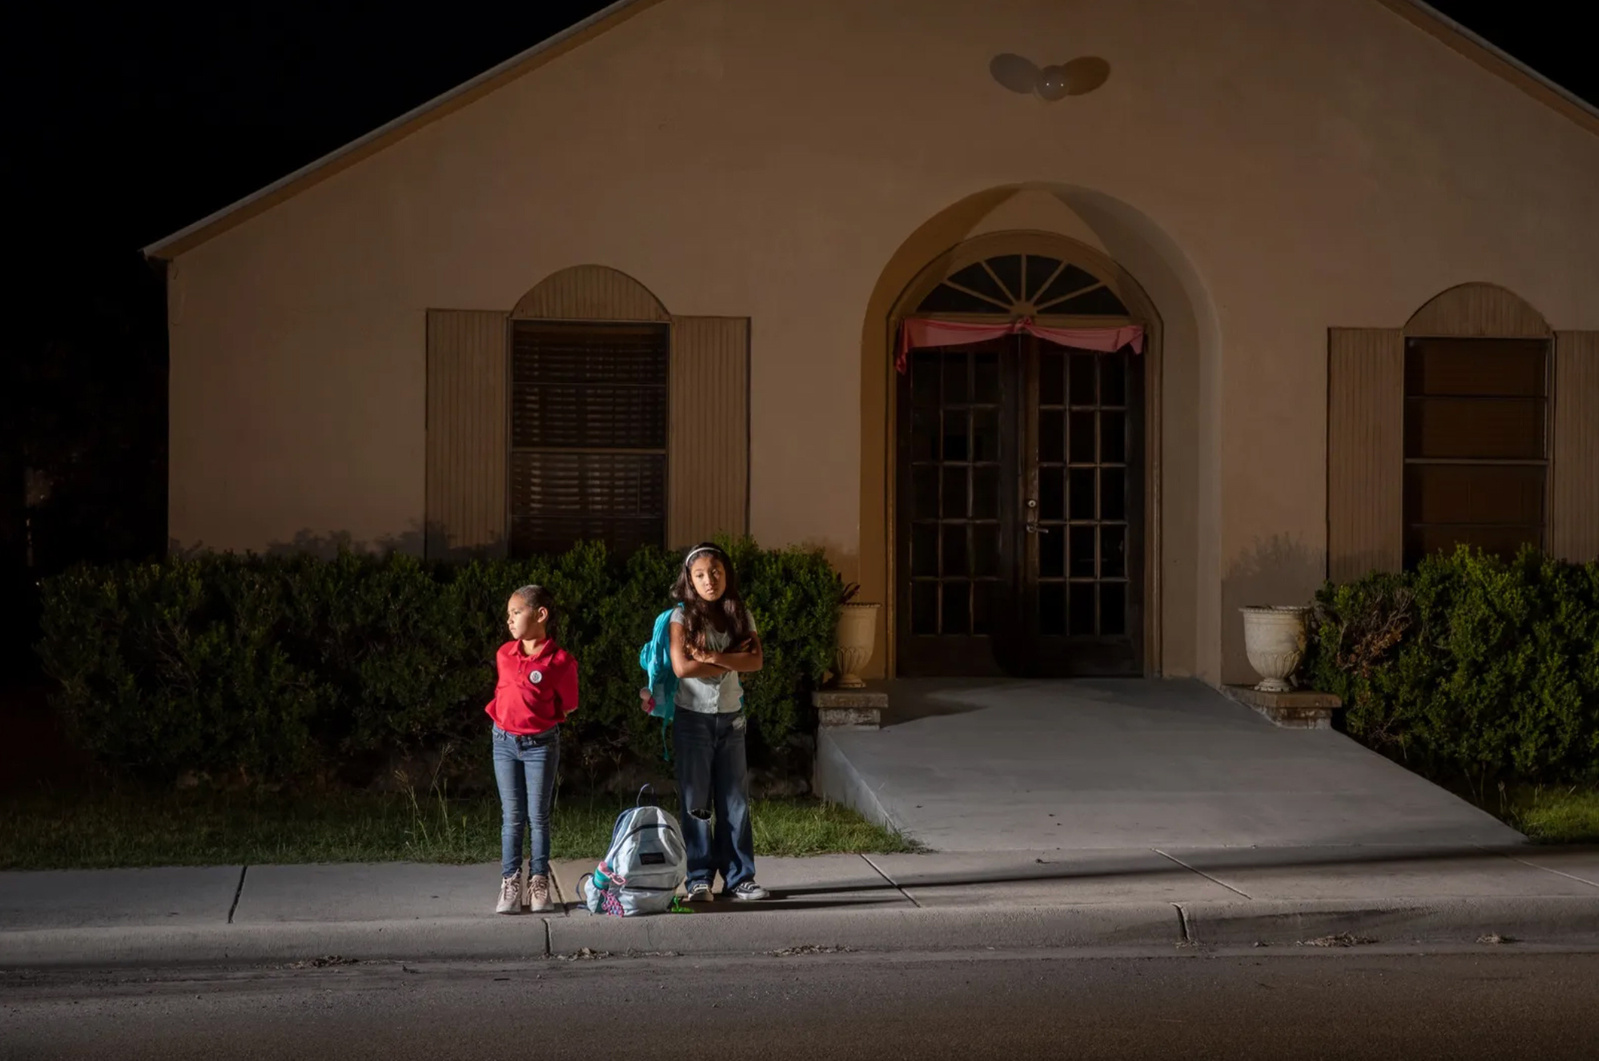 Waiting for the School Bus in Uvalde / Photos by Greg Miller for The New Yorker